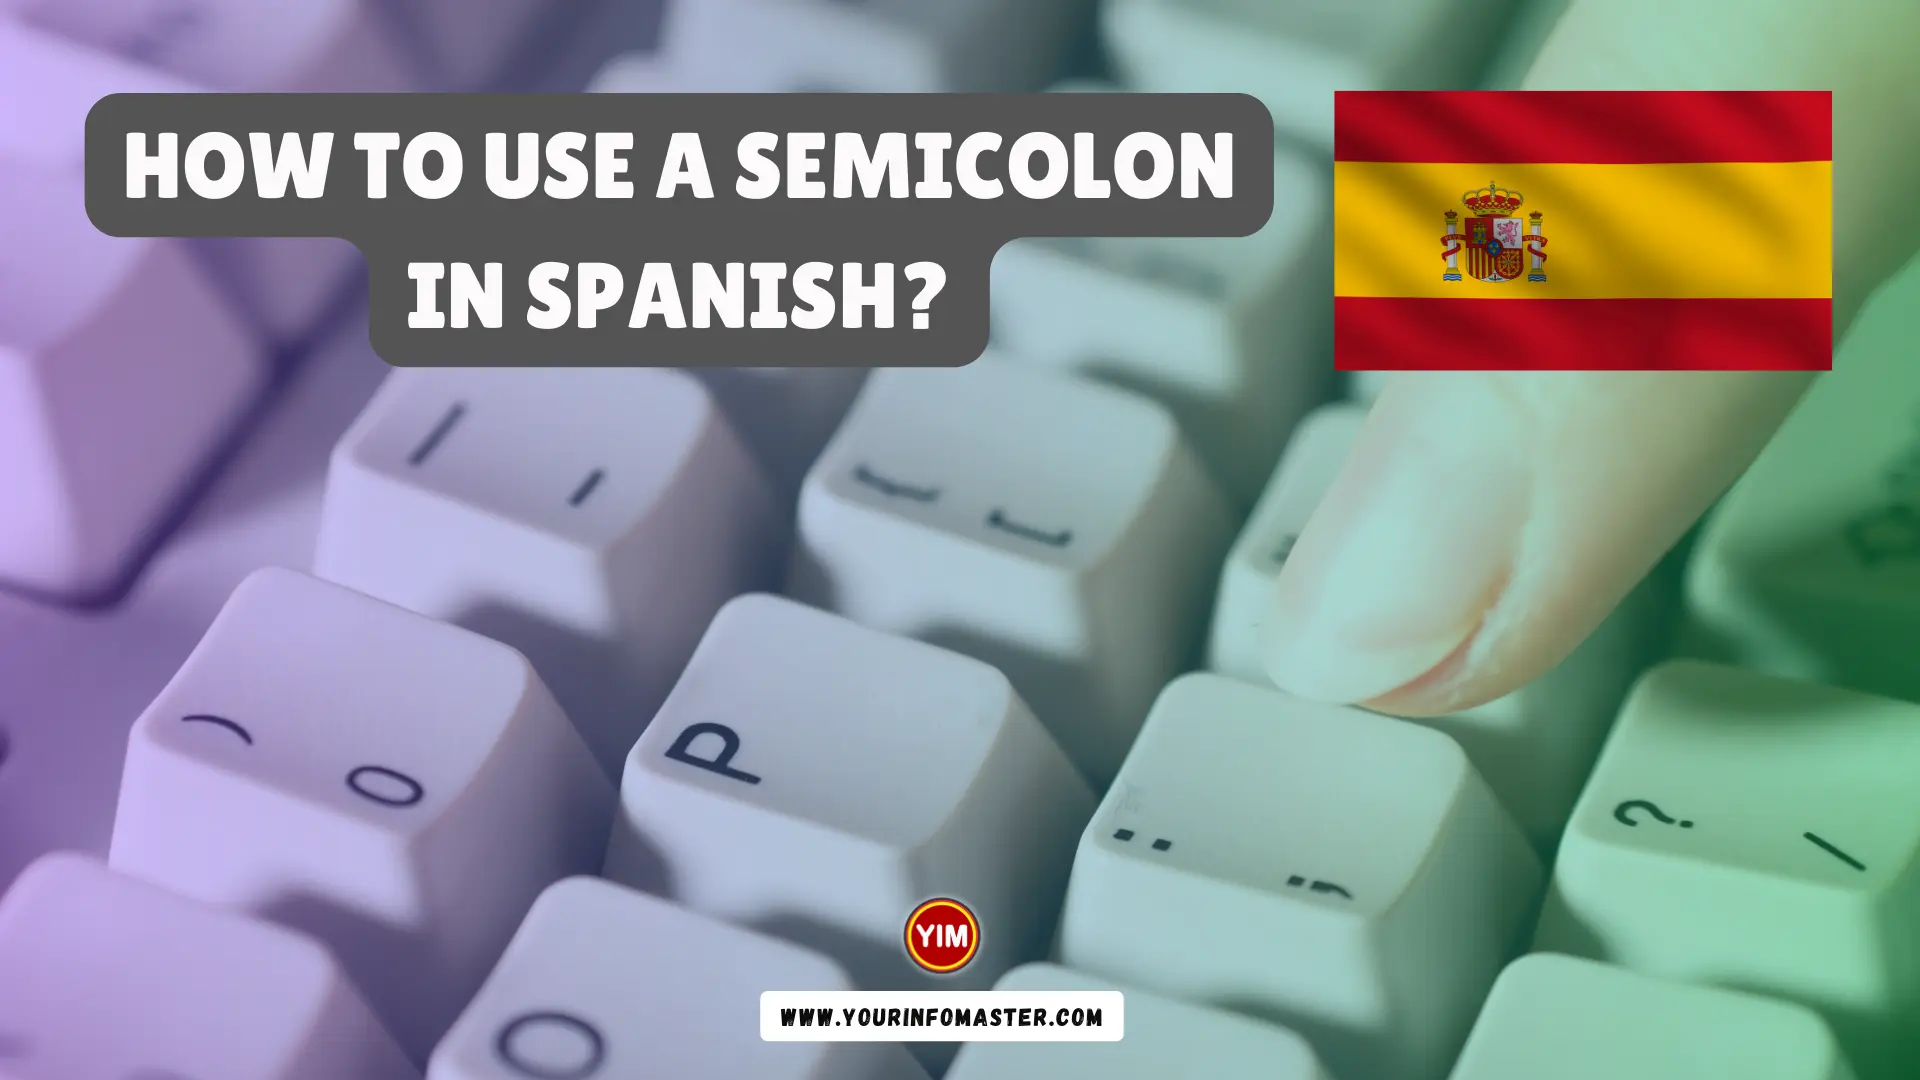 How to Use a Semicolon in Spanish (1)